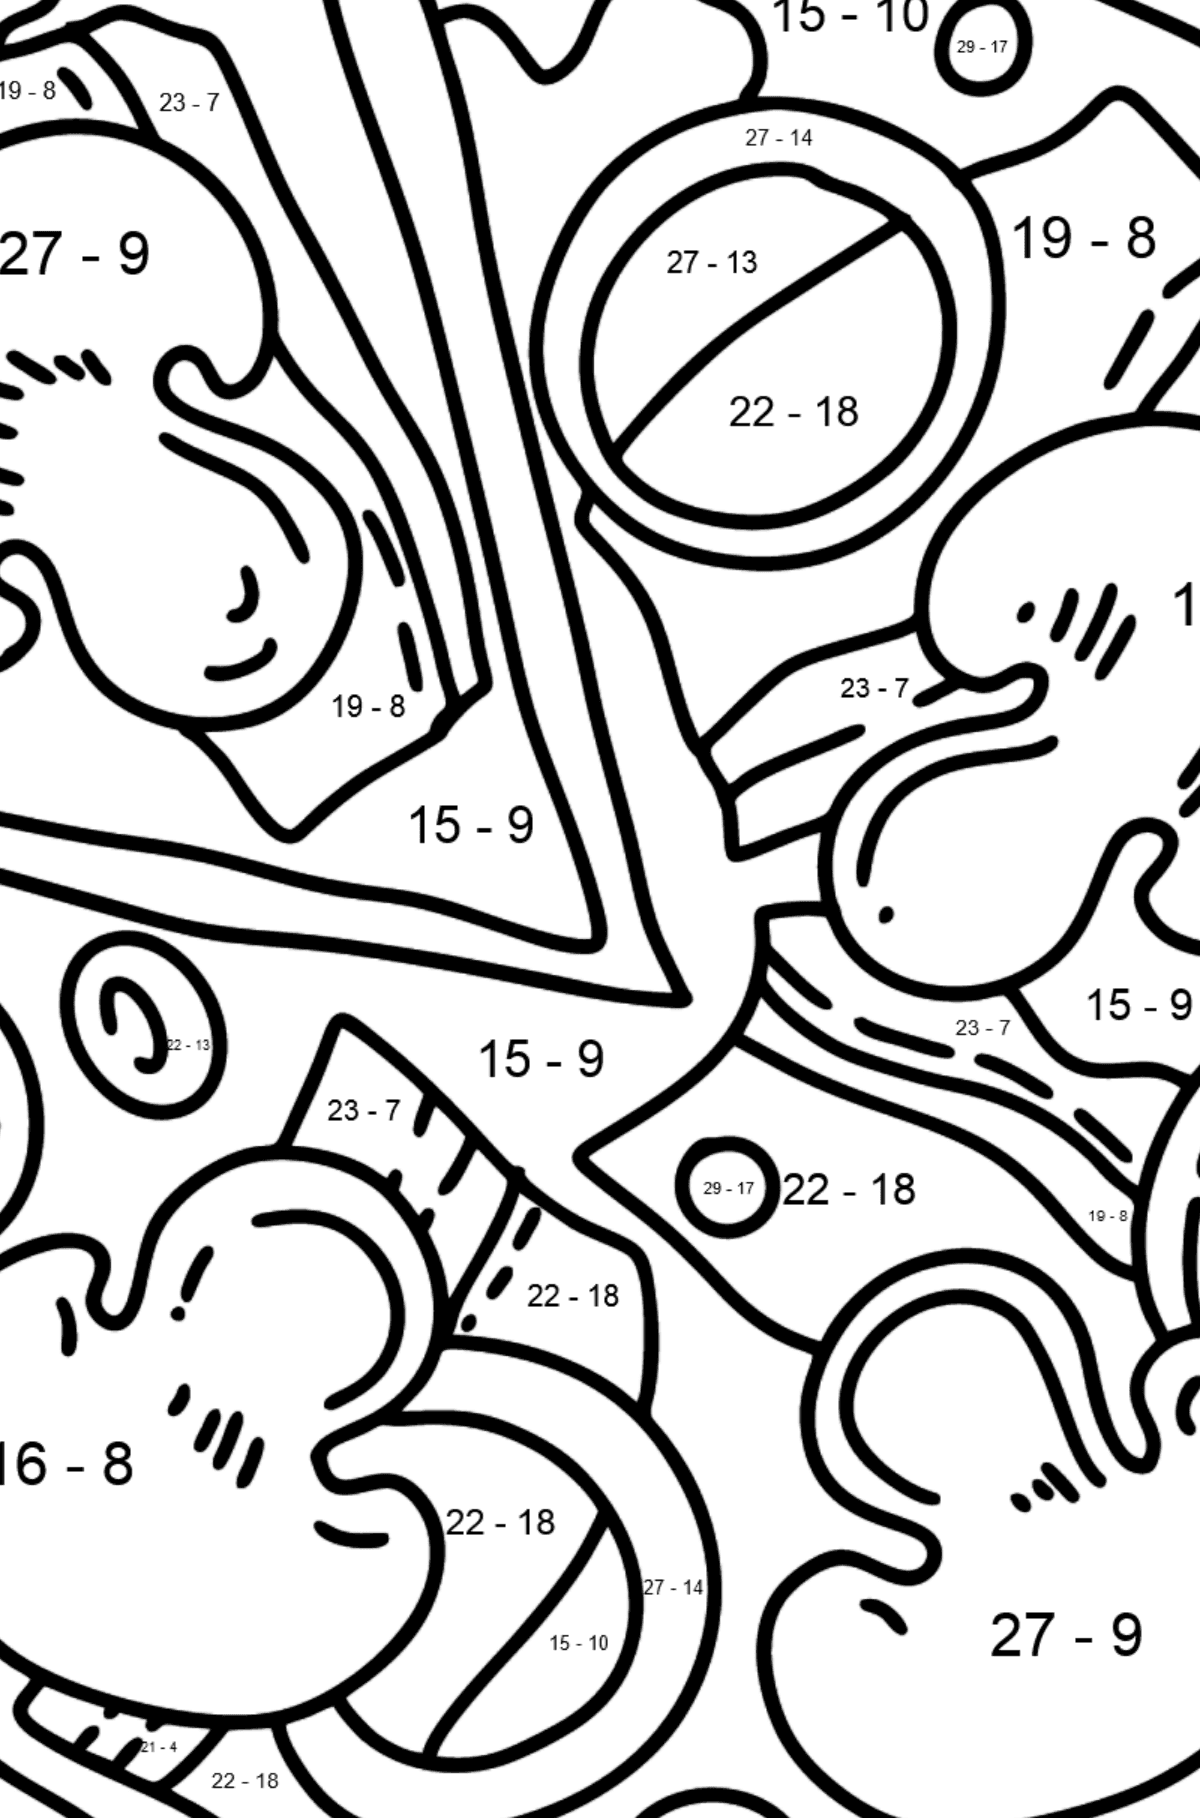 Pizza with Mushrooms coloring page - Math Coloring - Subtraction for Kids